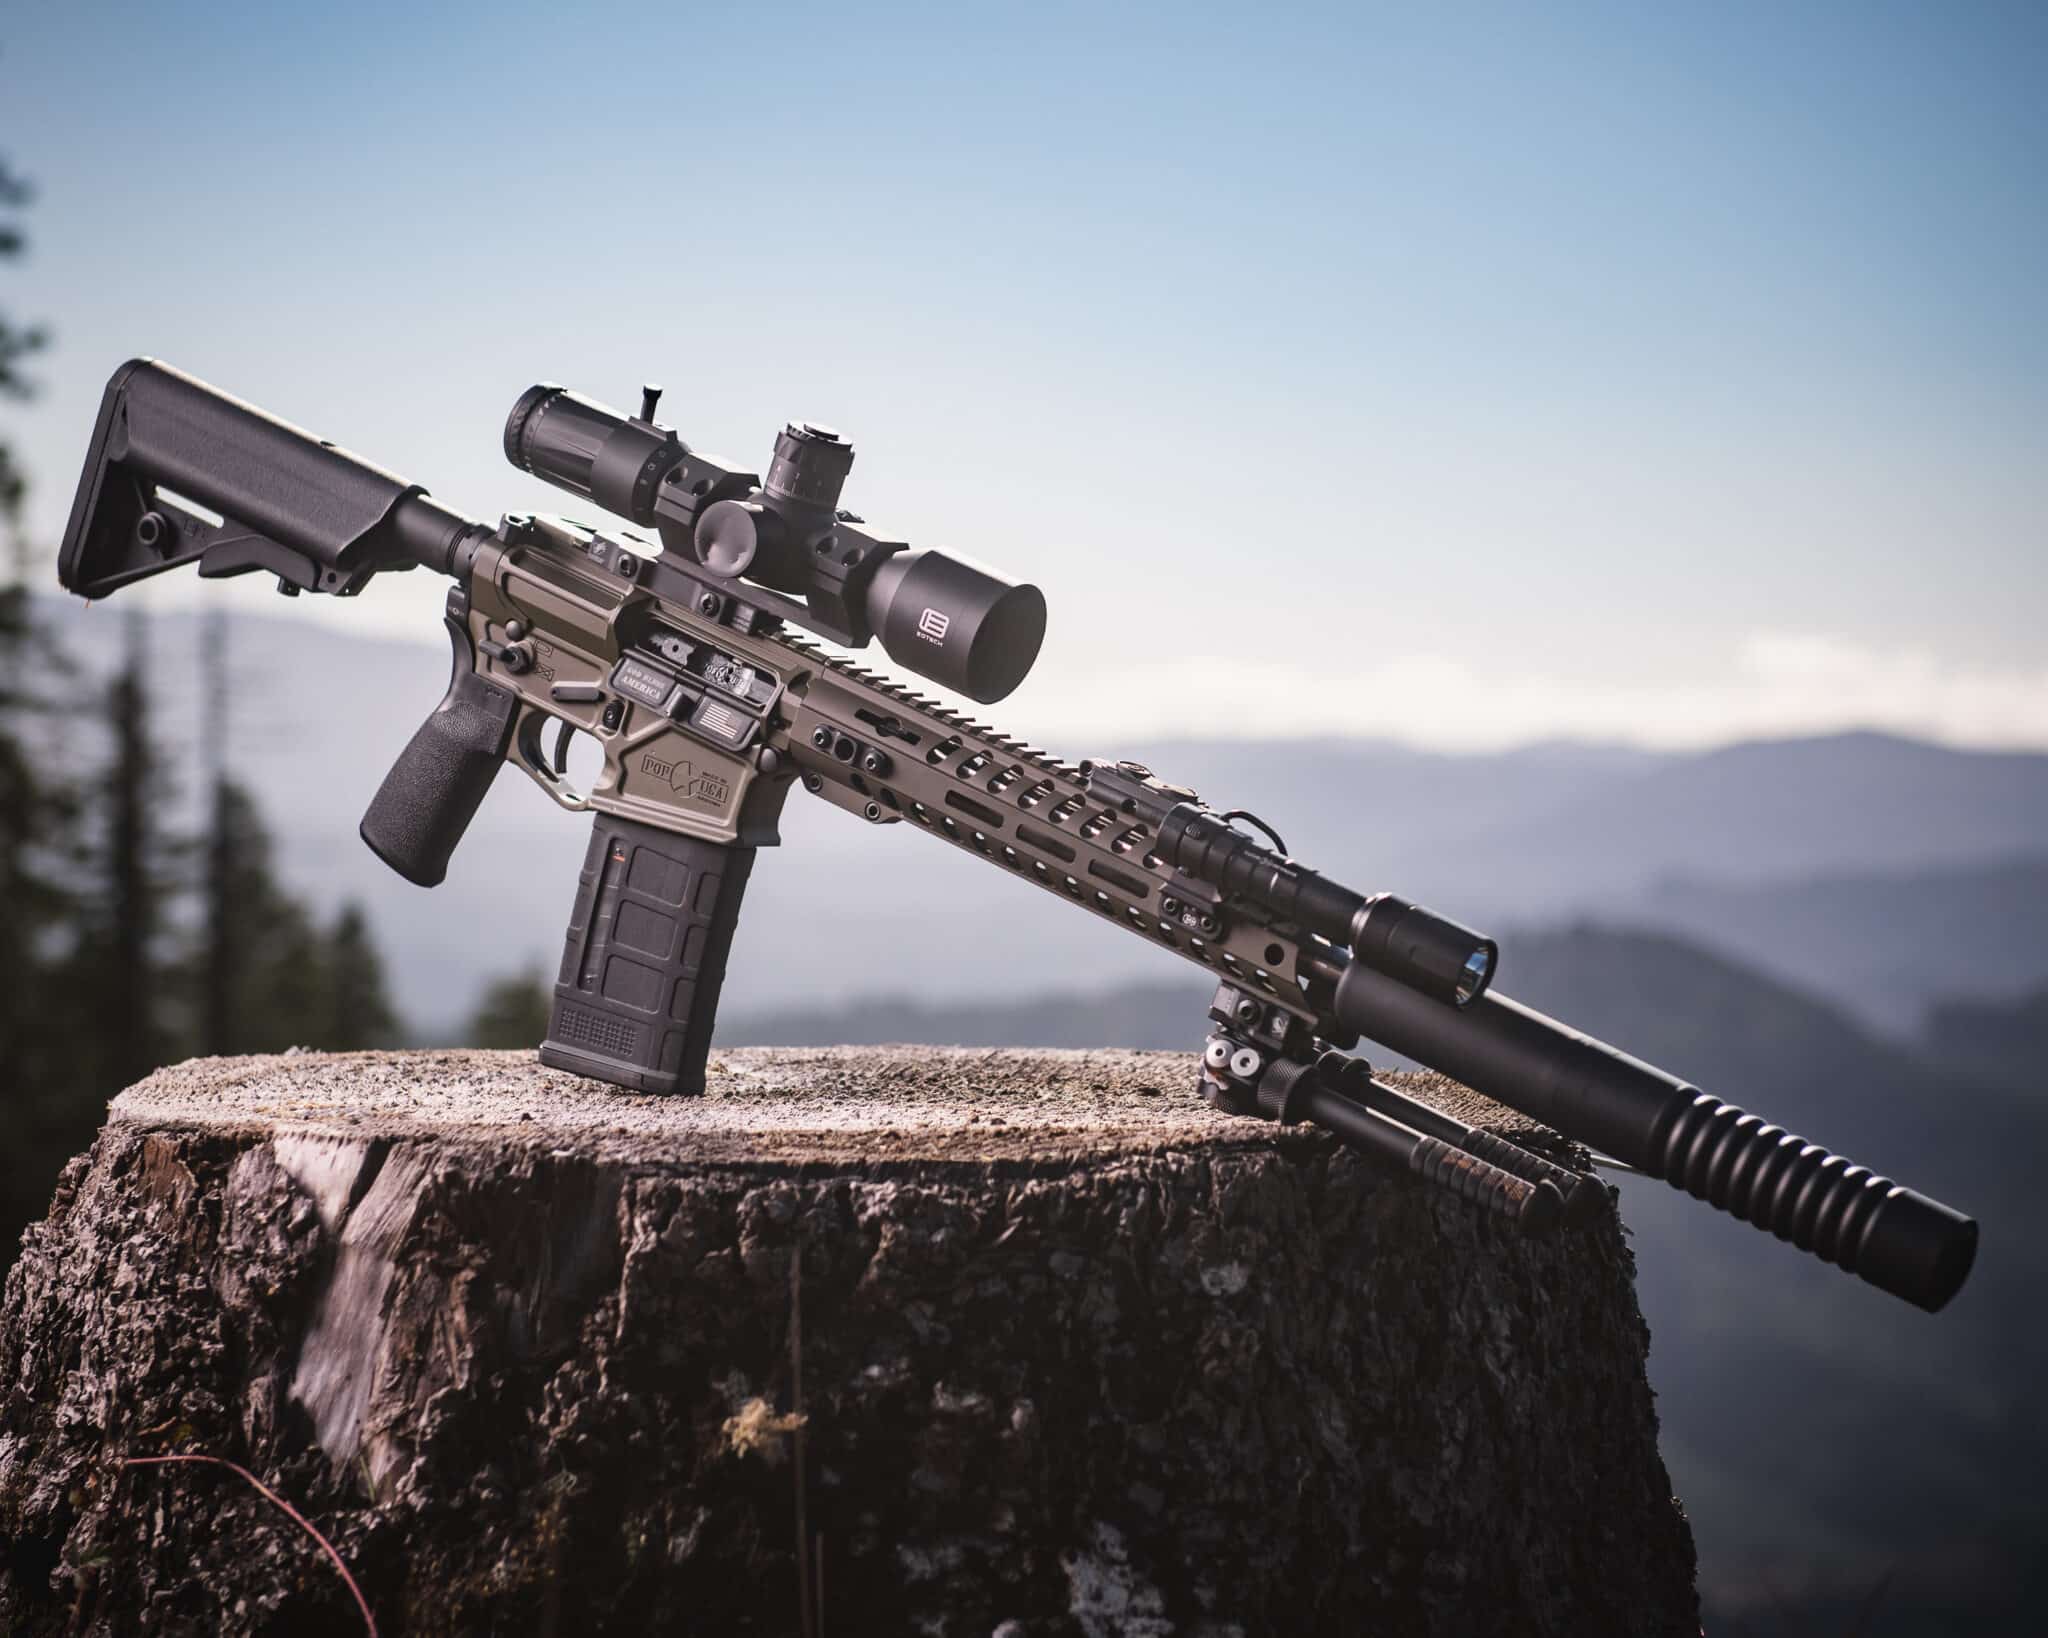 FMBPL 308: a straight-pull rifle for long range shooting from the USA